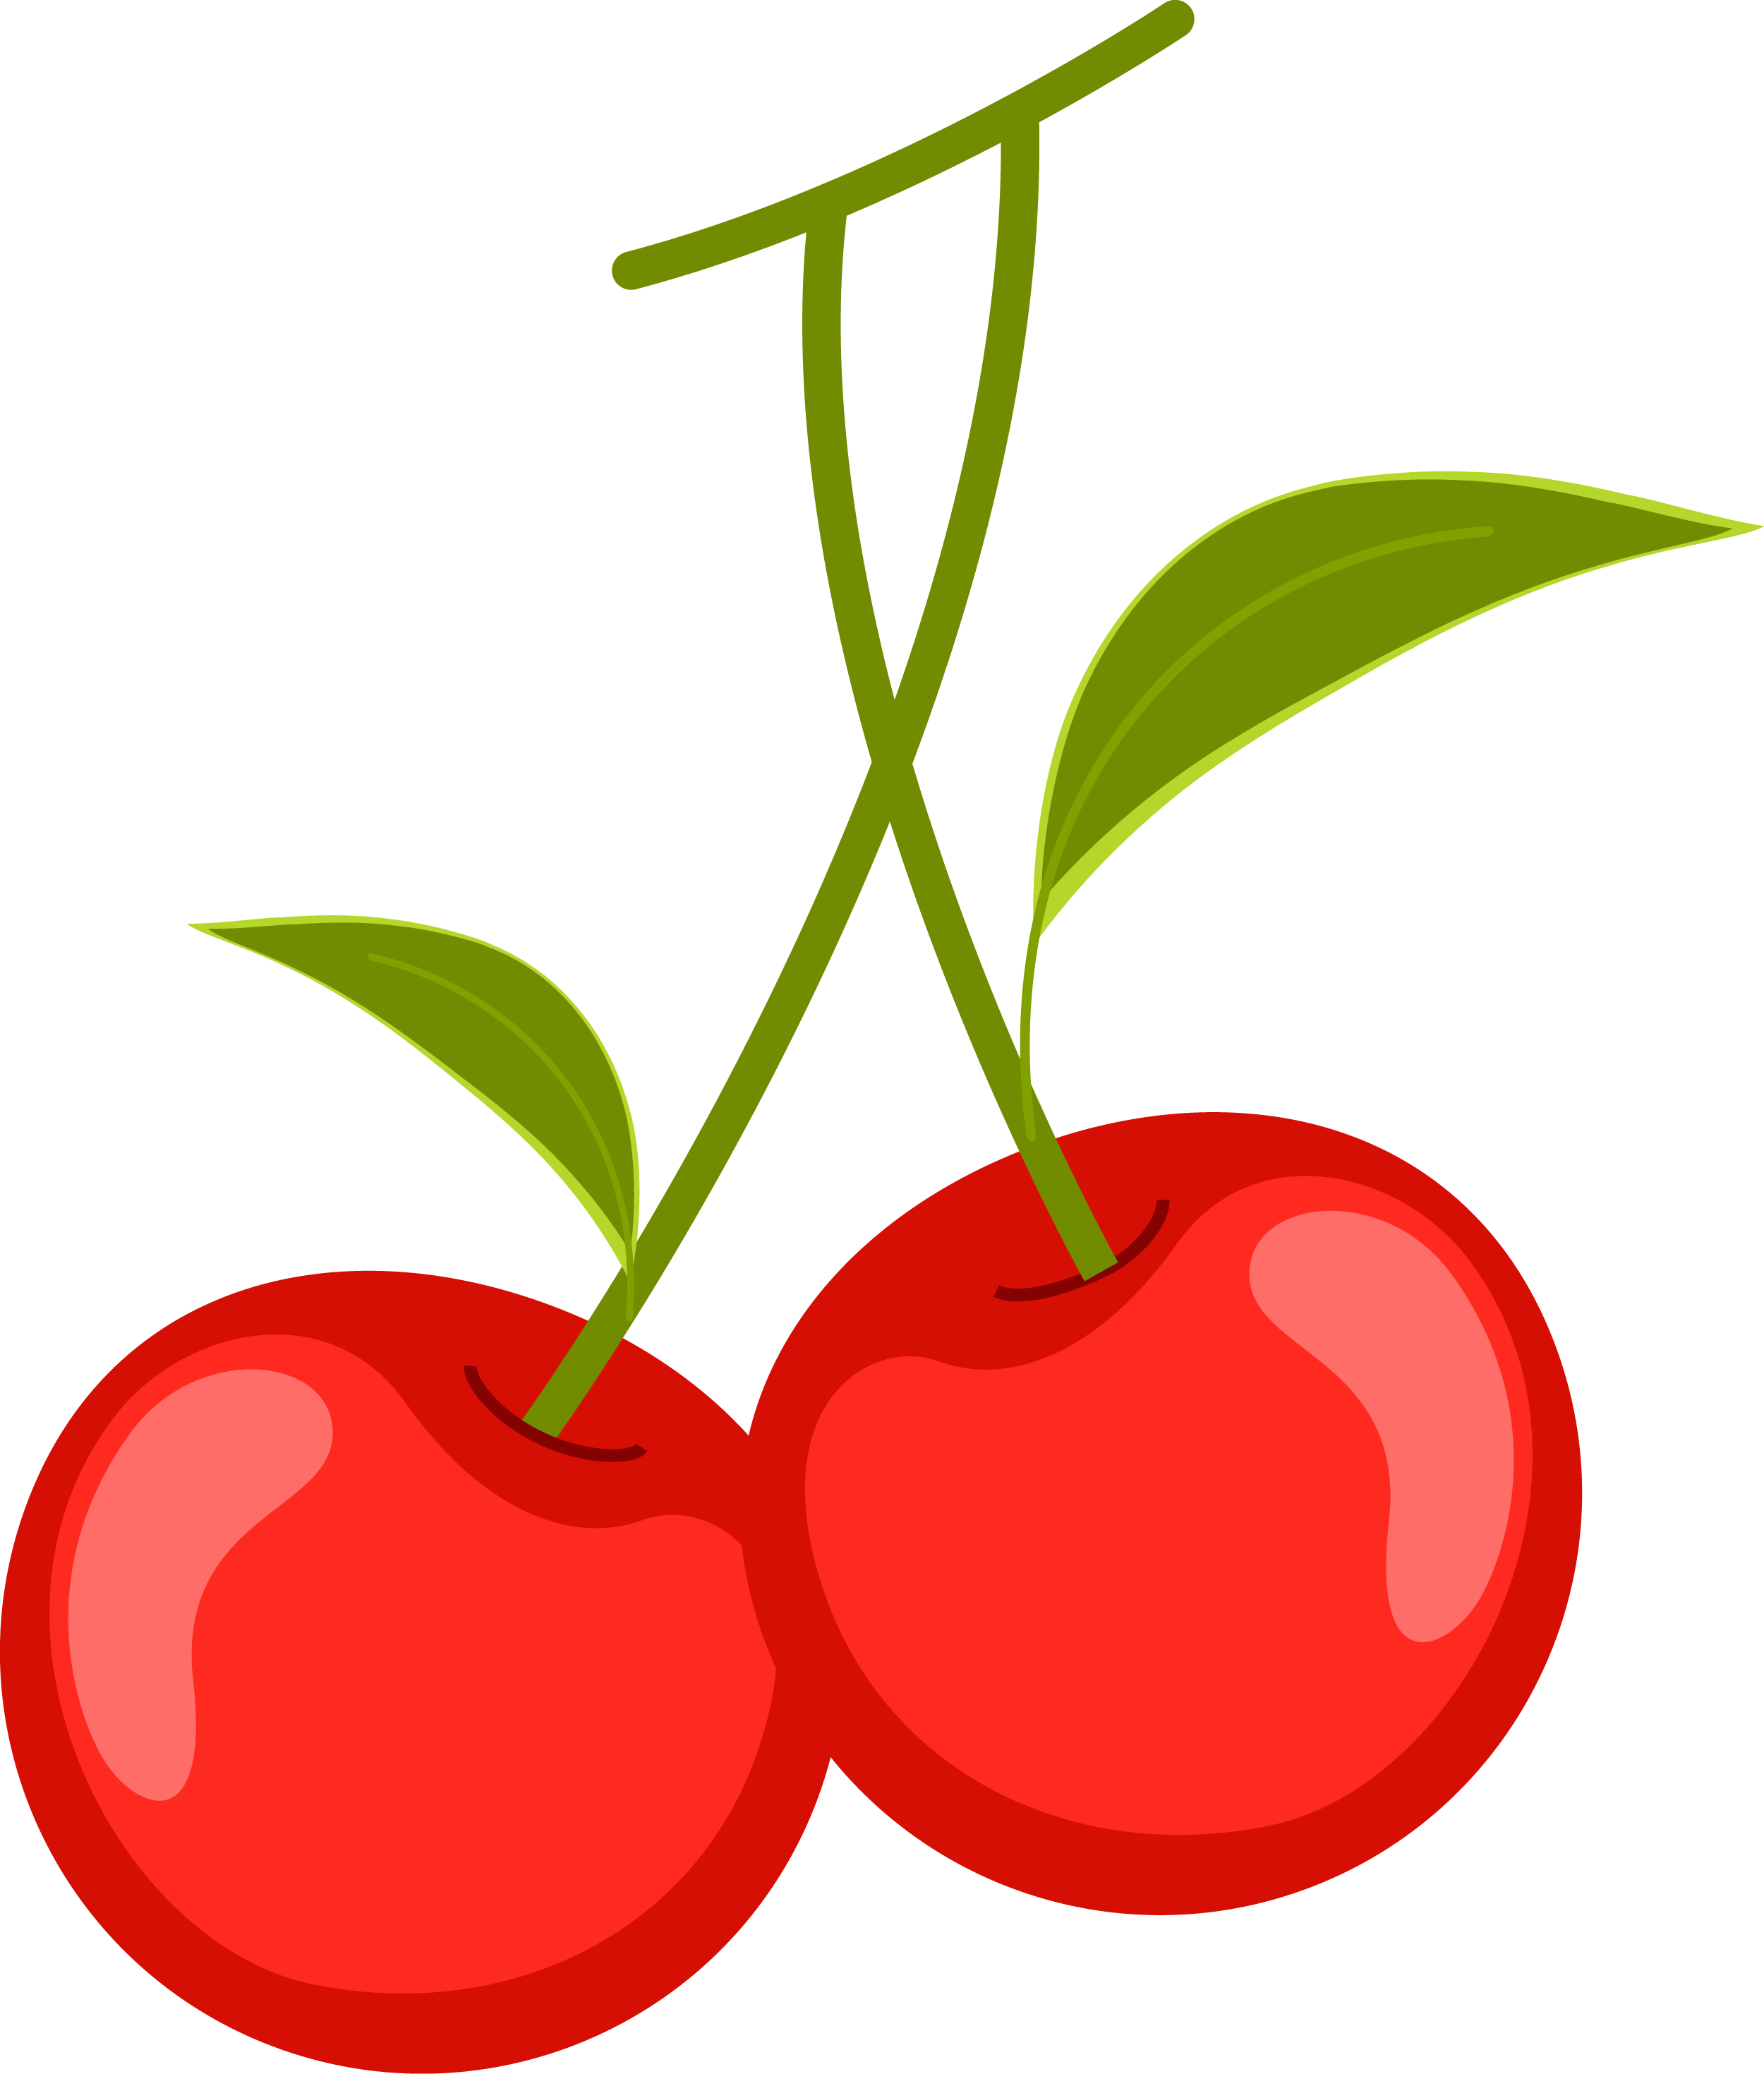 Premium PSD  Cherry fruit fruit, two cherries on a white background png  clipart